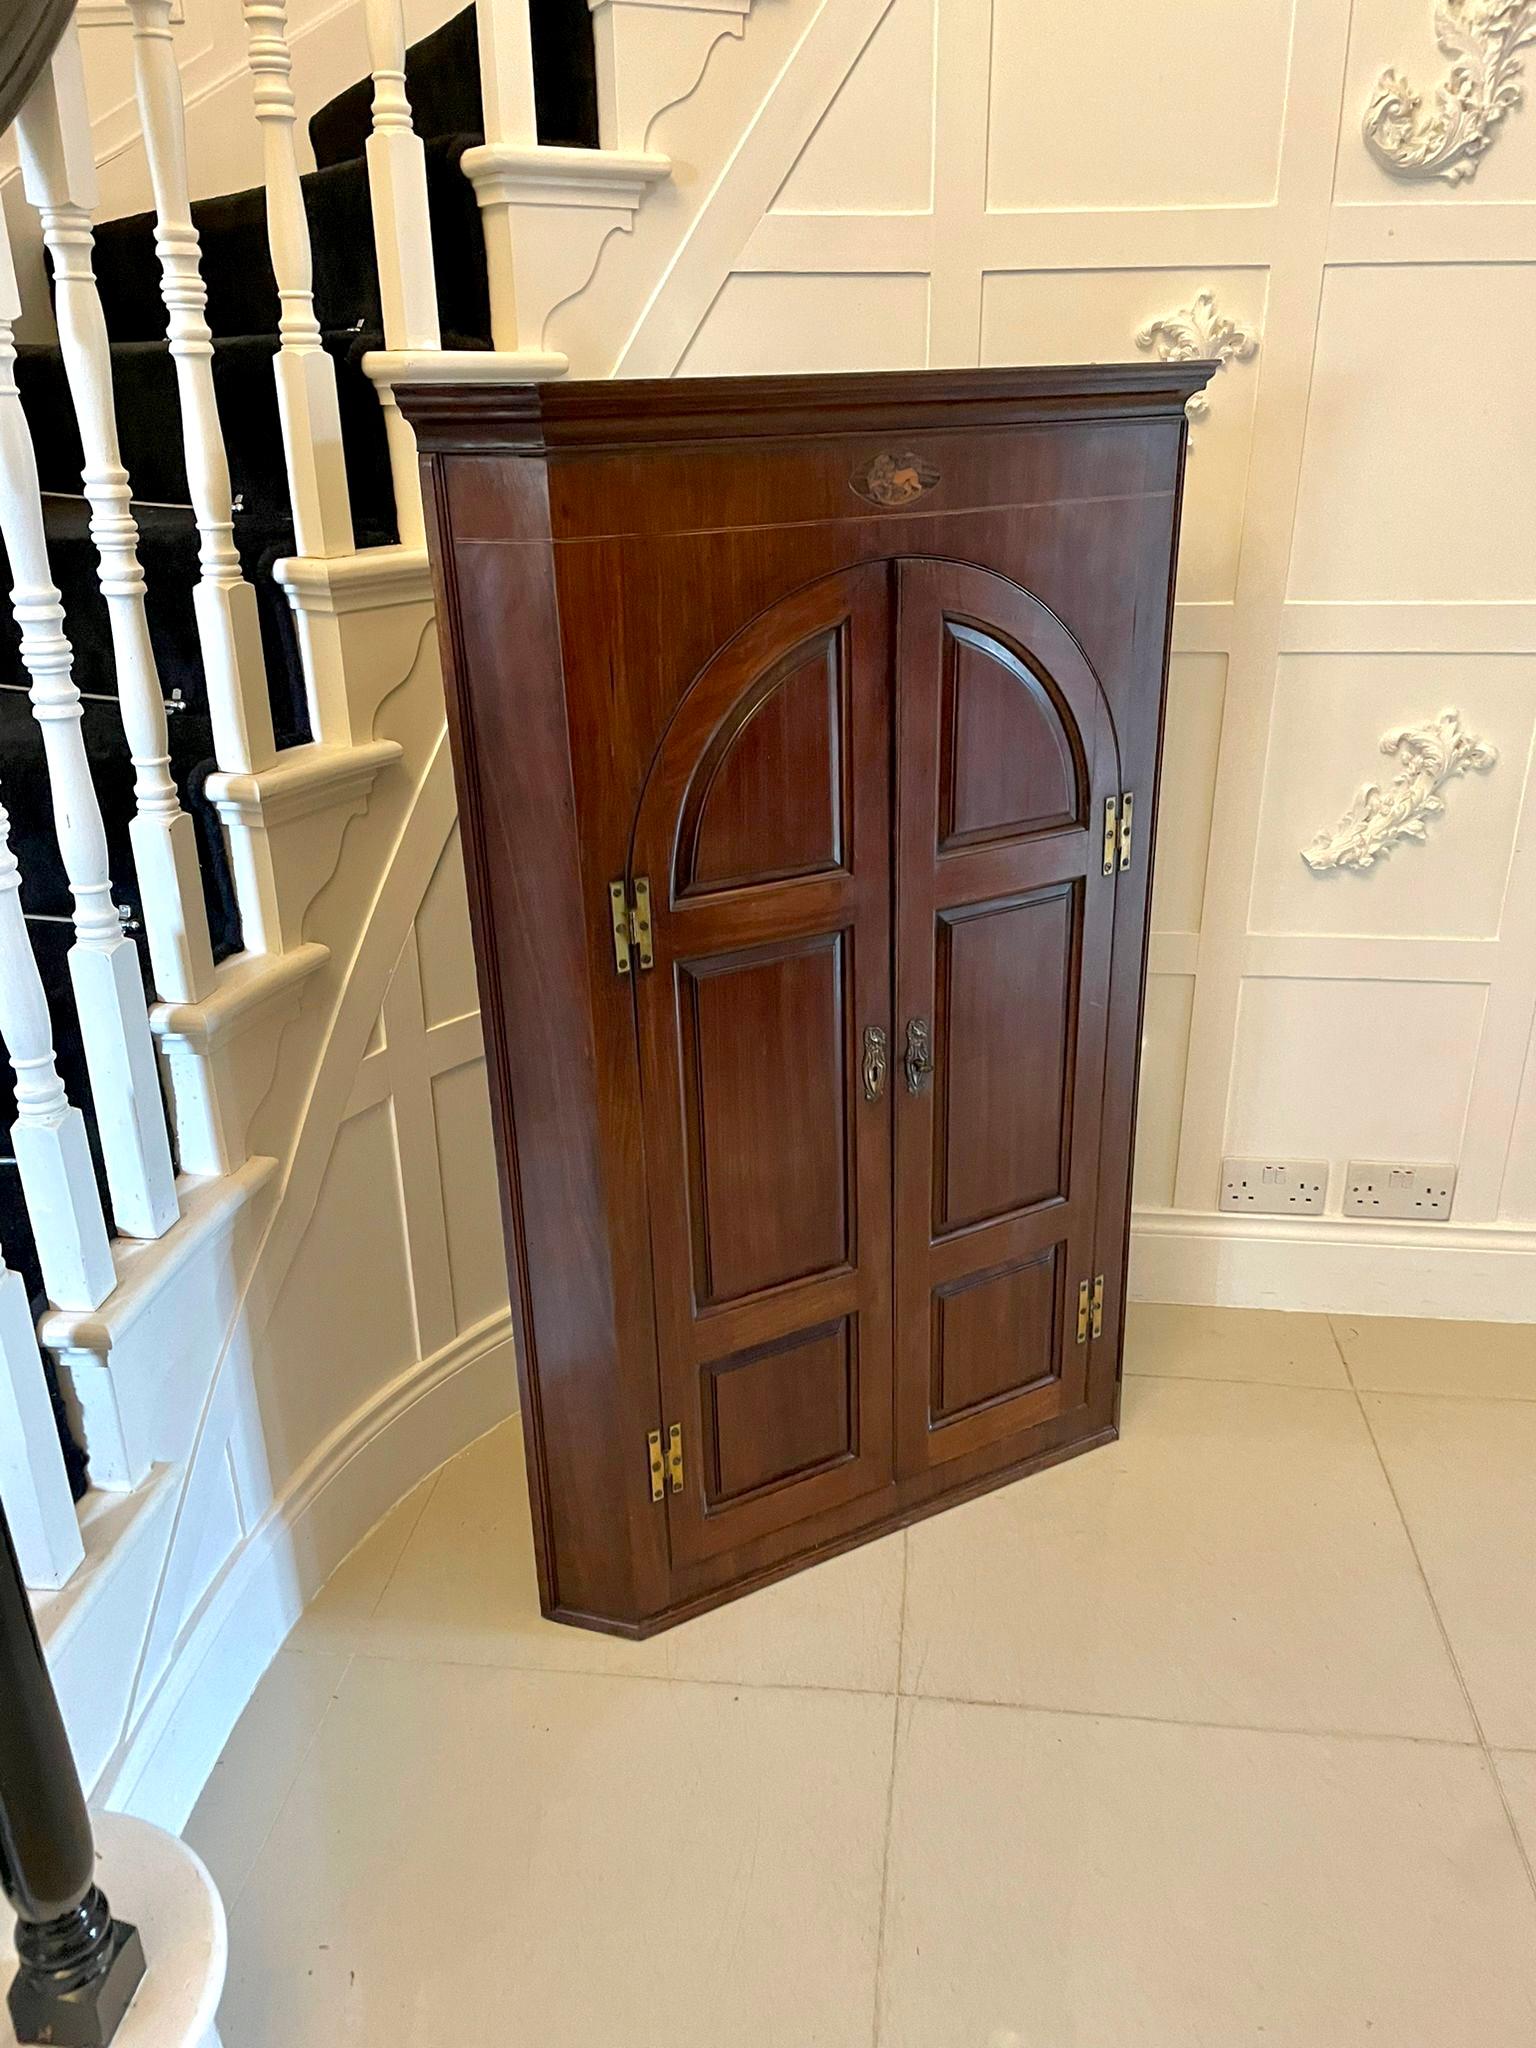 fine quality George III antique mahogany hanging corner cabinet with a charming shaped cornice above two arched panelled doors with original brass H-hinges and a delightful fitted interior. It comes with the original key.

A splendid example in